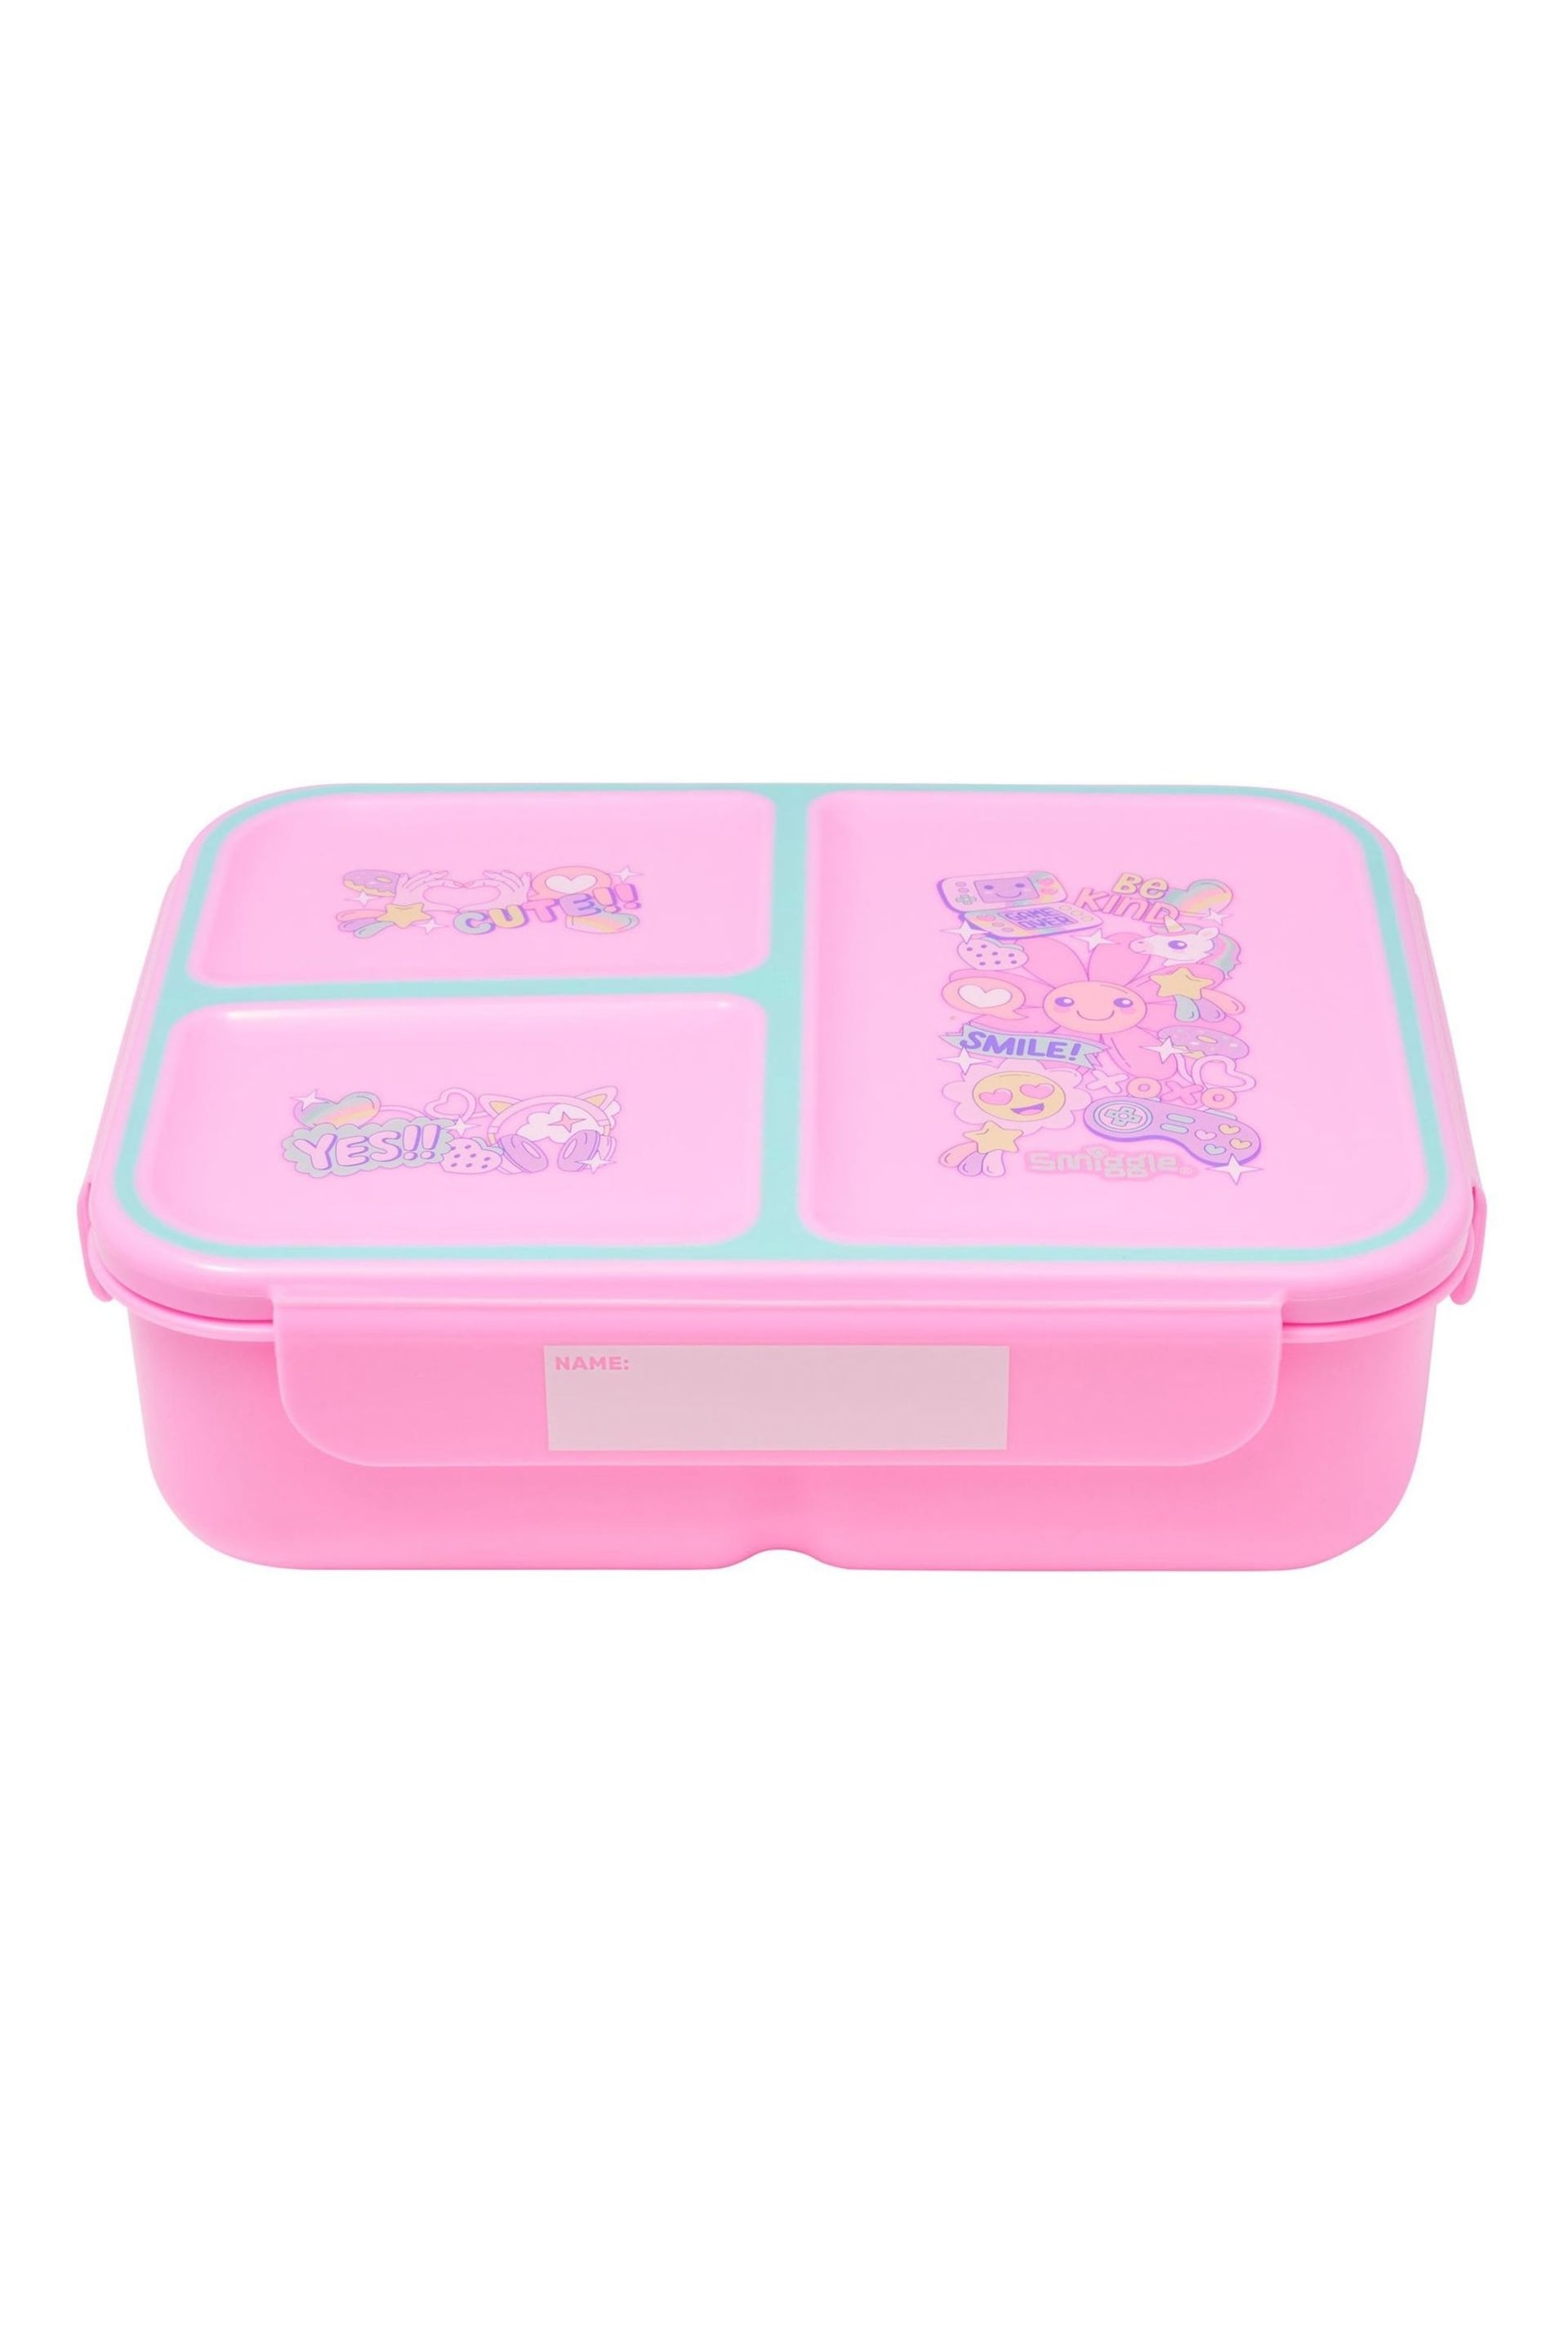 Smiggle Pink Epic Adventures Boost Trio Lunchbox - Image 2 of 3